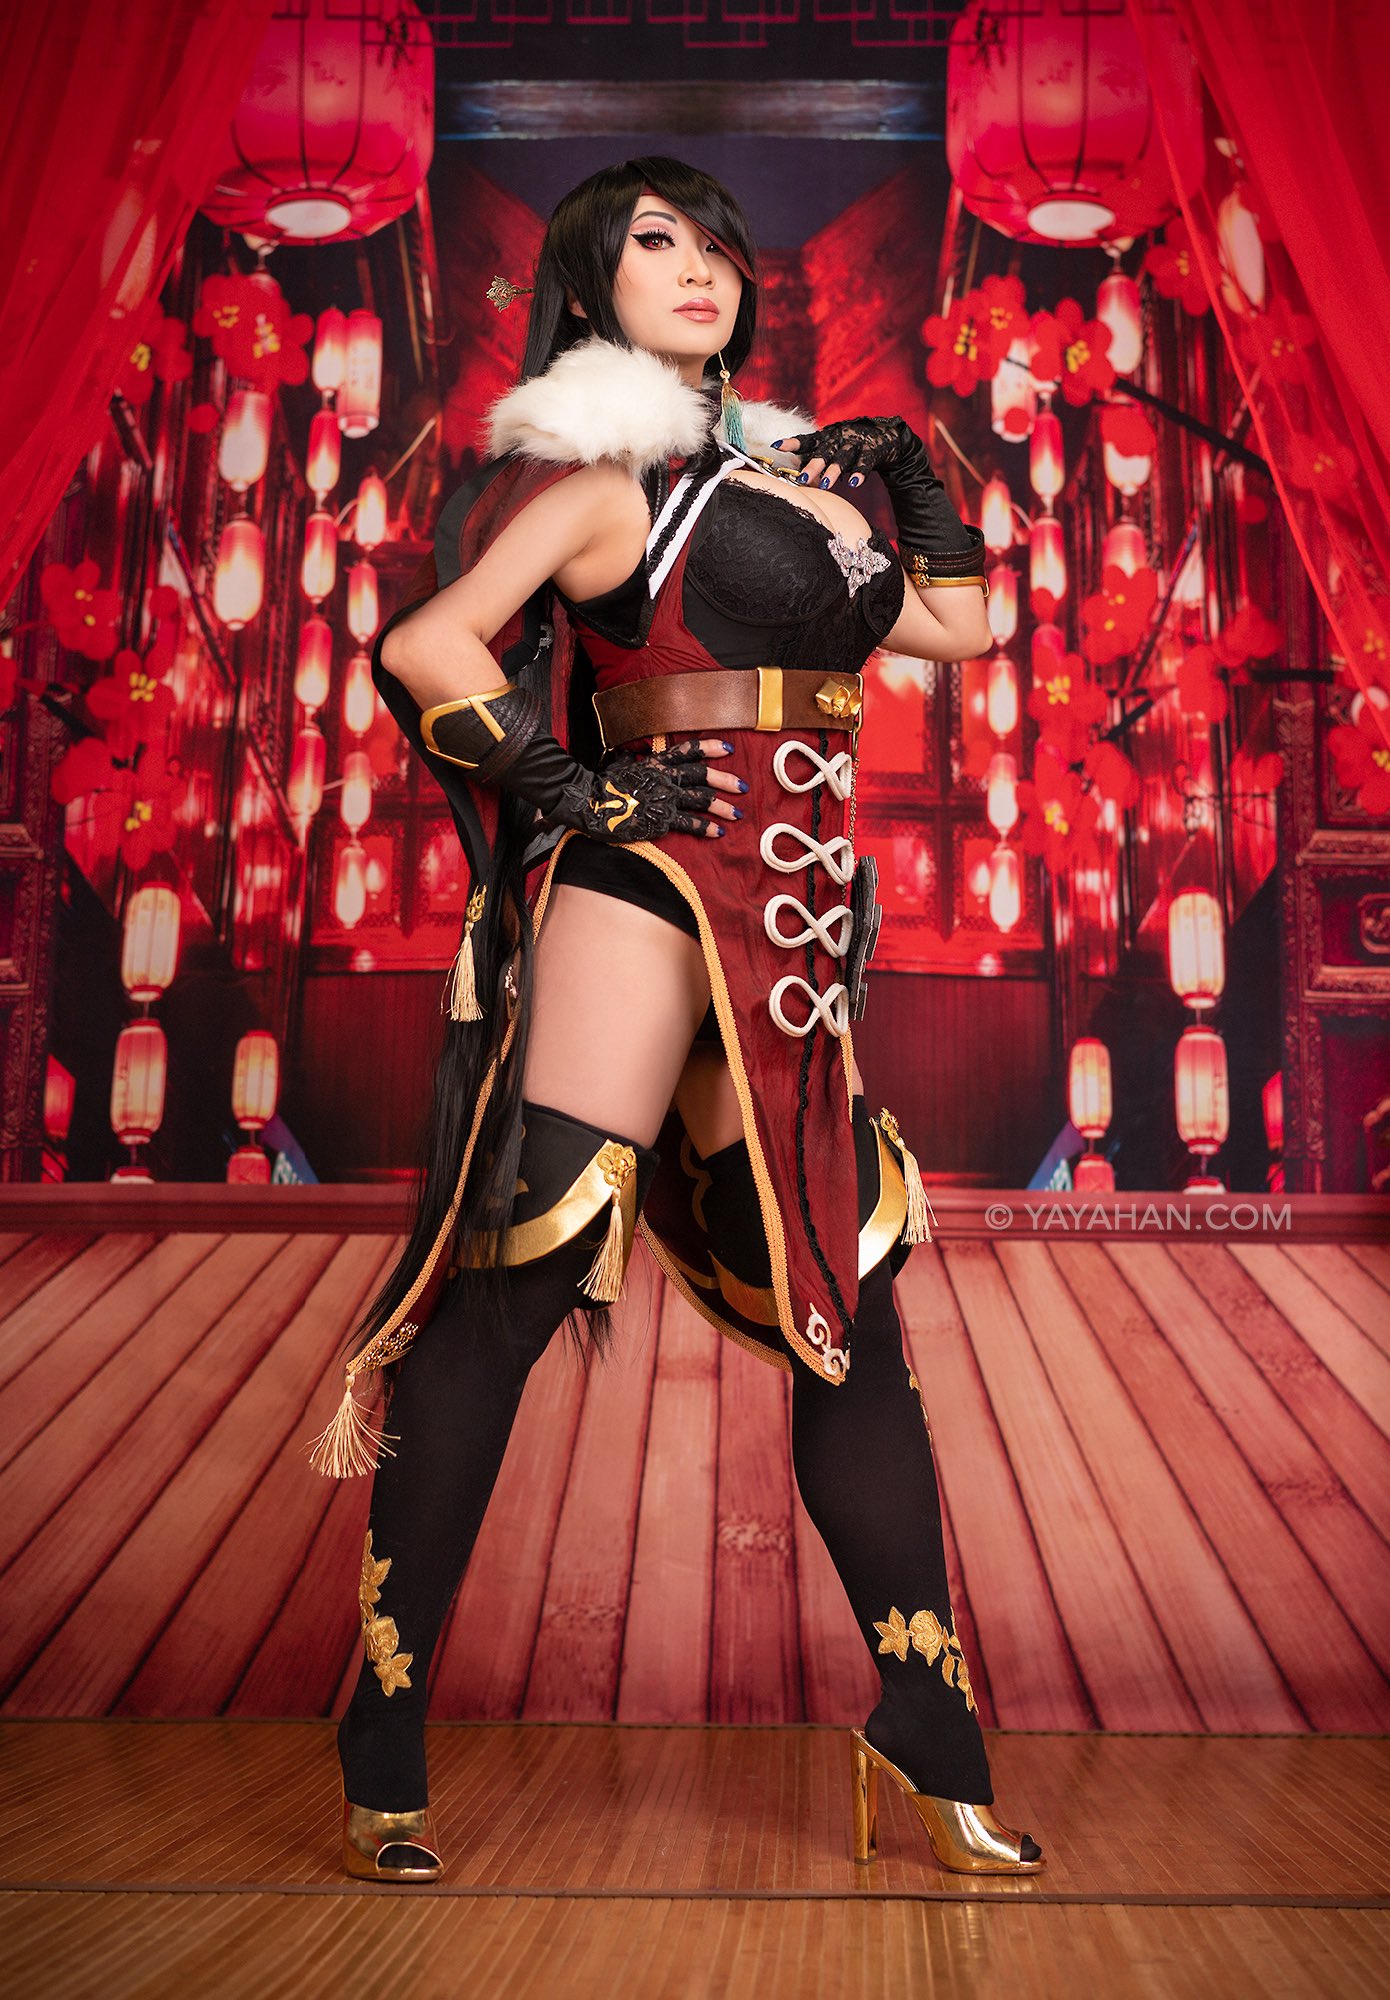 Yaya Han on X: Happy Lunar New Year from Captain Beidou! I feel so  powerful in thigh high stockings and an eyepatch… Photos by Brian Boling  Costume made by @TheFantasyNinja #GenshinImpact  /